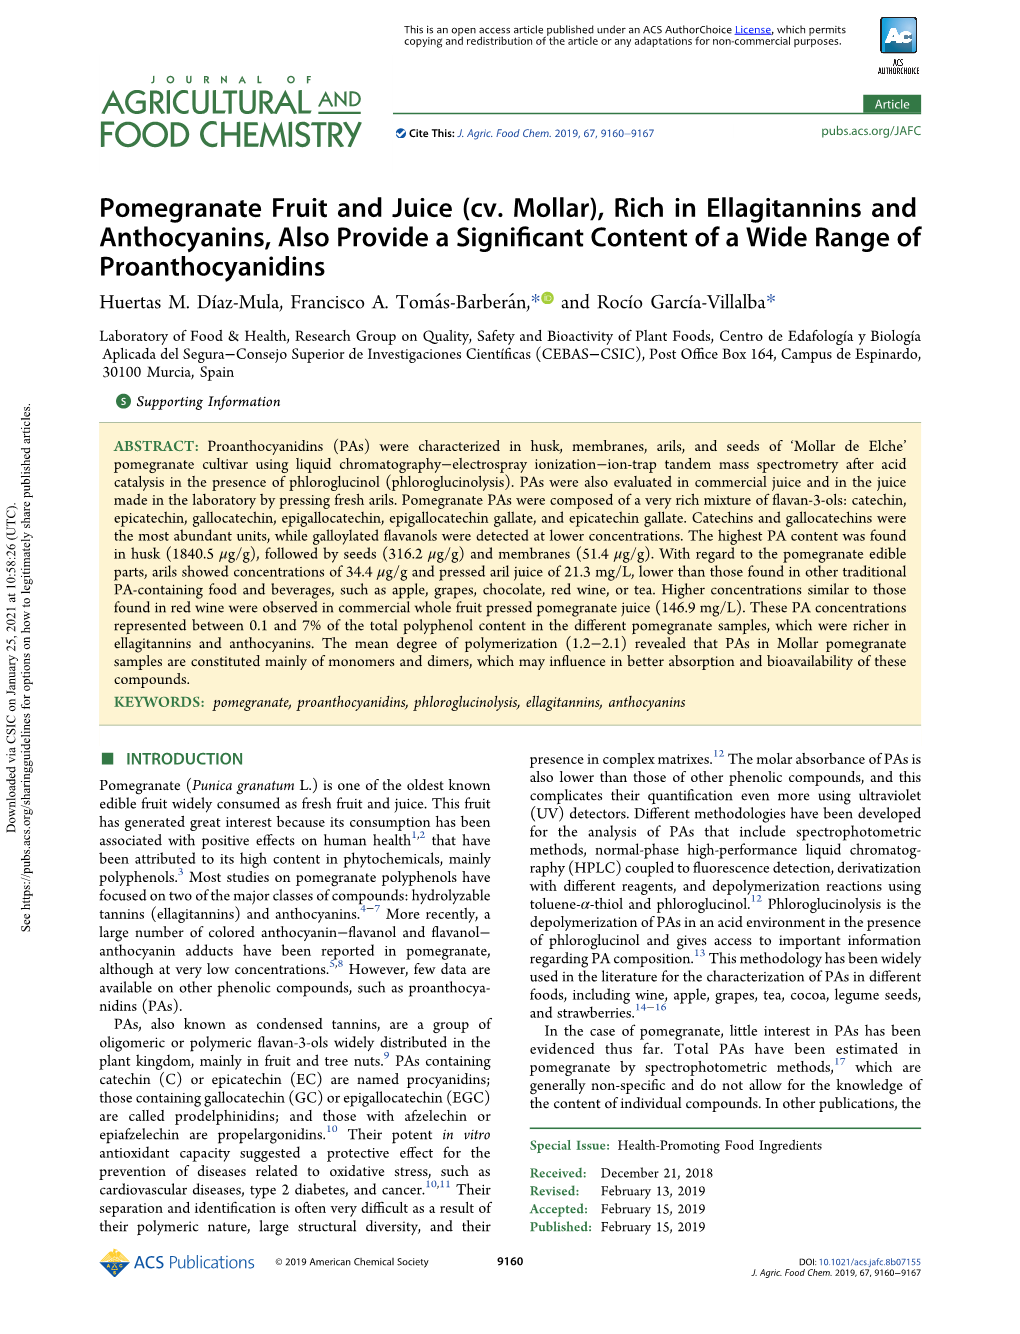 Pomegranate Fruit and Juice (Cv. Mollar), Rich in Ellagitannins and Anthocyanins, Also Provide a Signiﬁcant Content of a Wide Range of Proanthocyanidins Huertas M